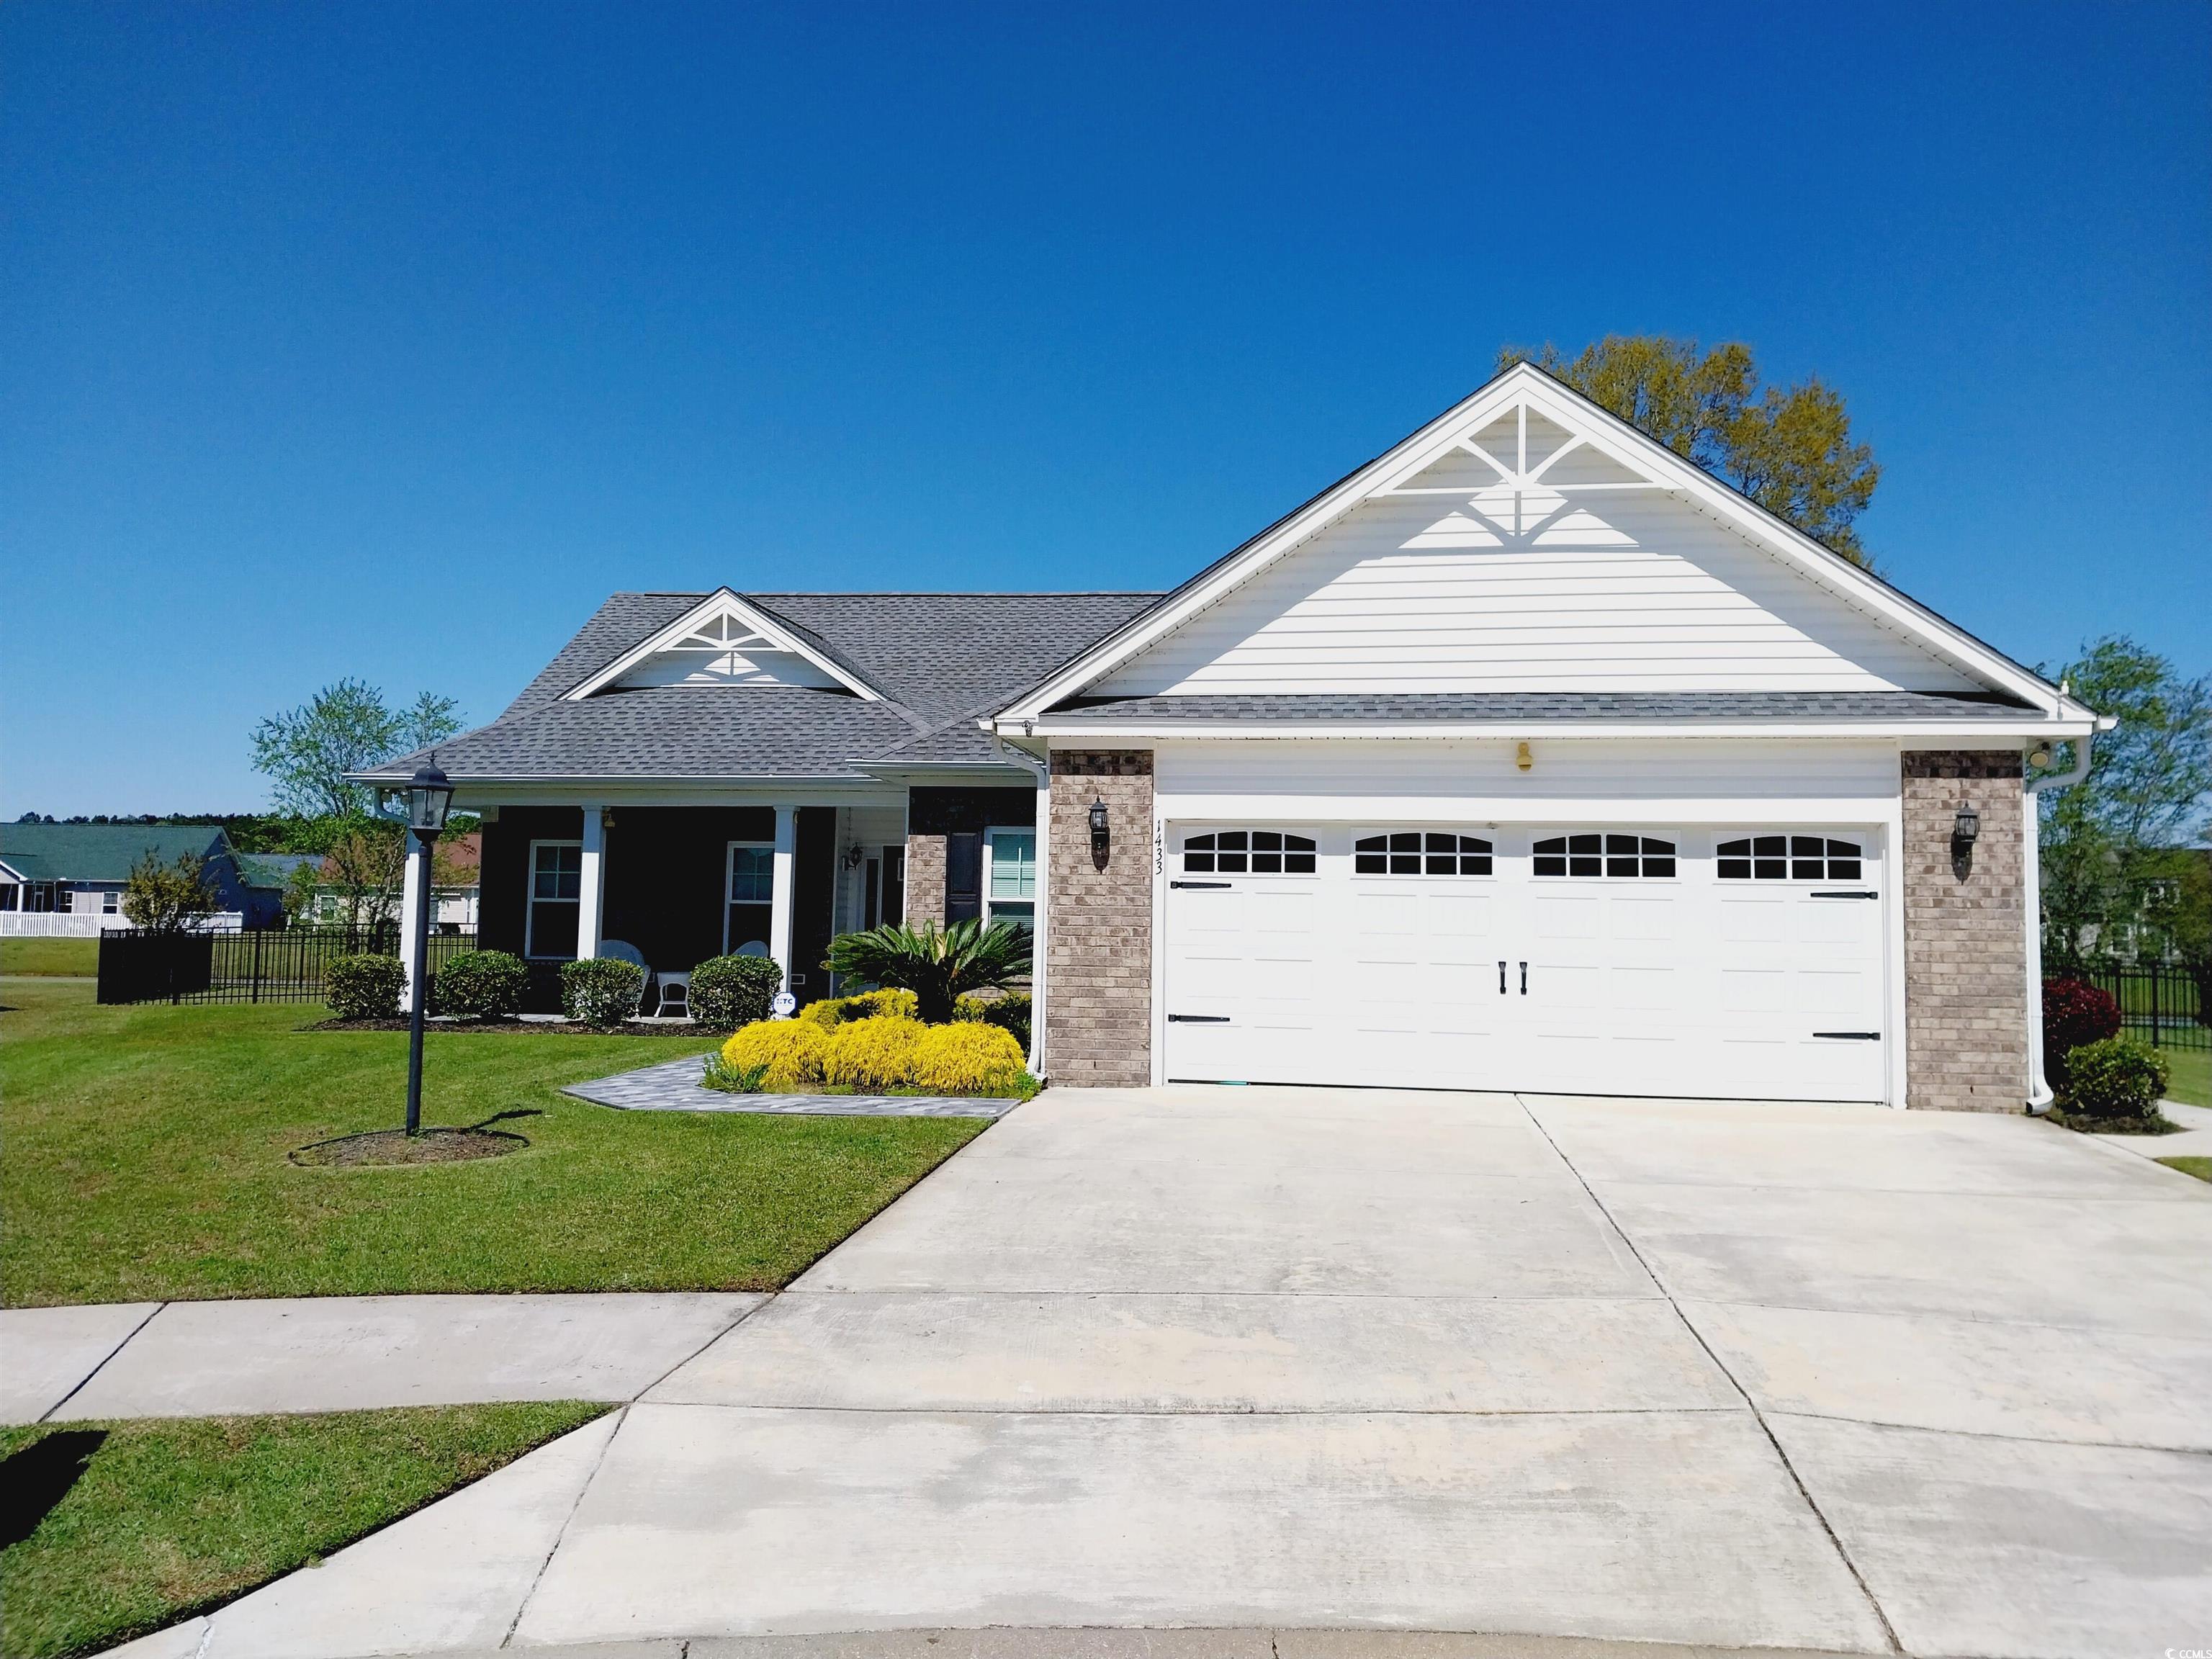 1433 Tiger Grand Dr. Conway, SC 29526